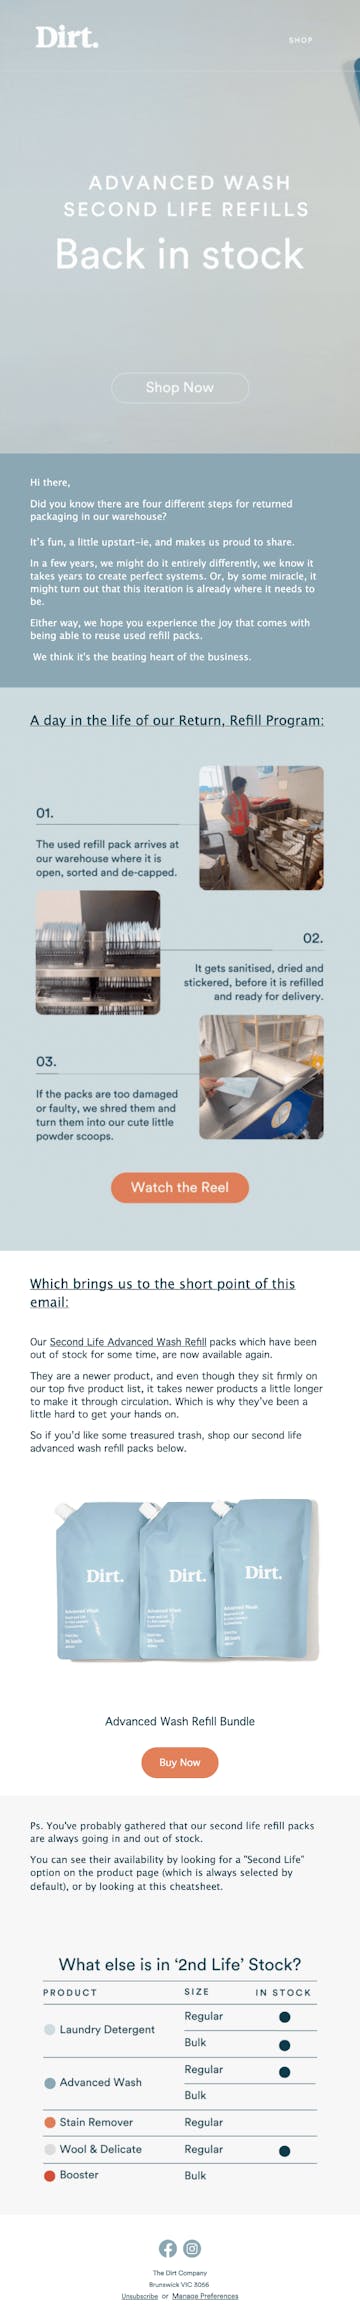 The Dirt Company Email Design Thumbnail Preview